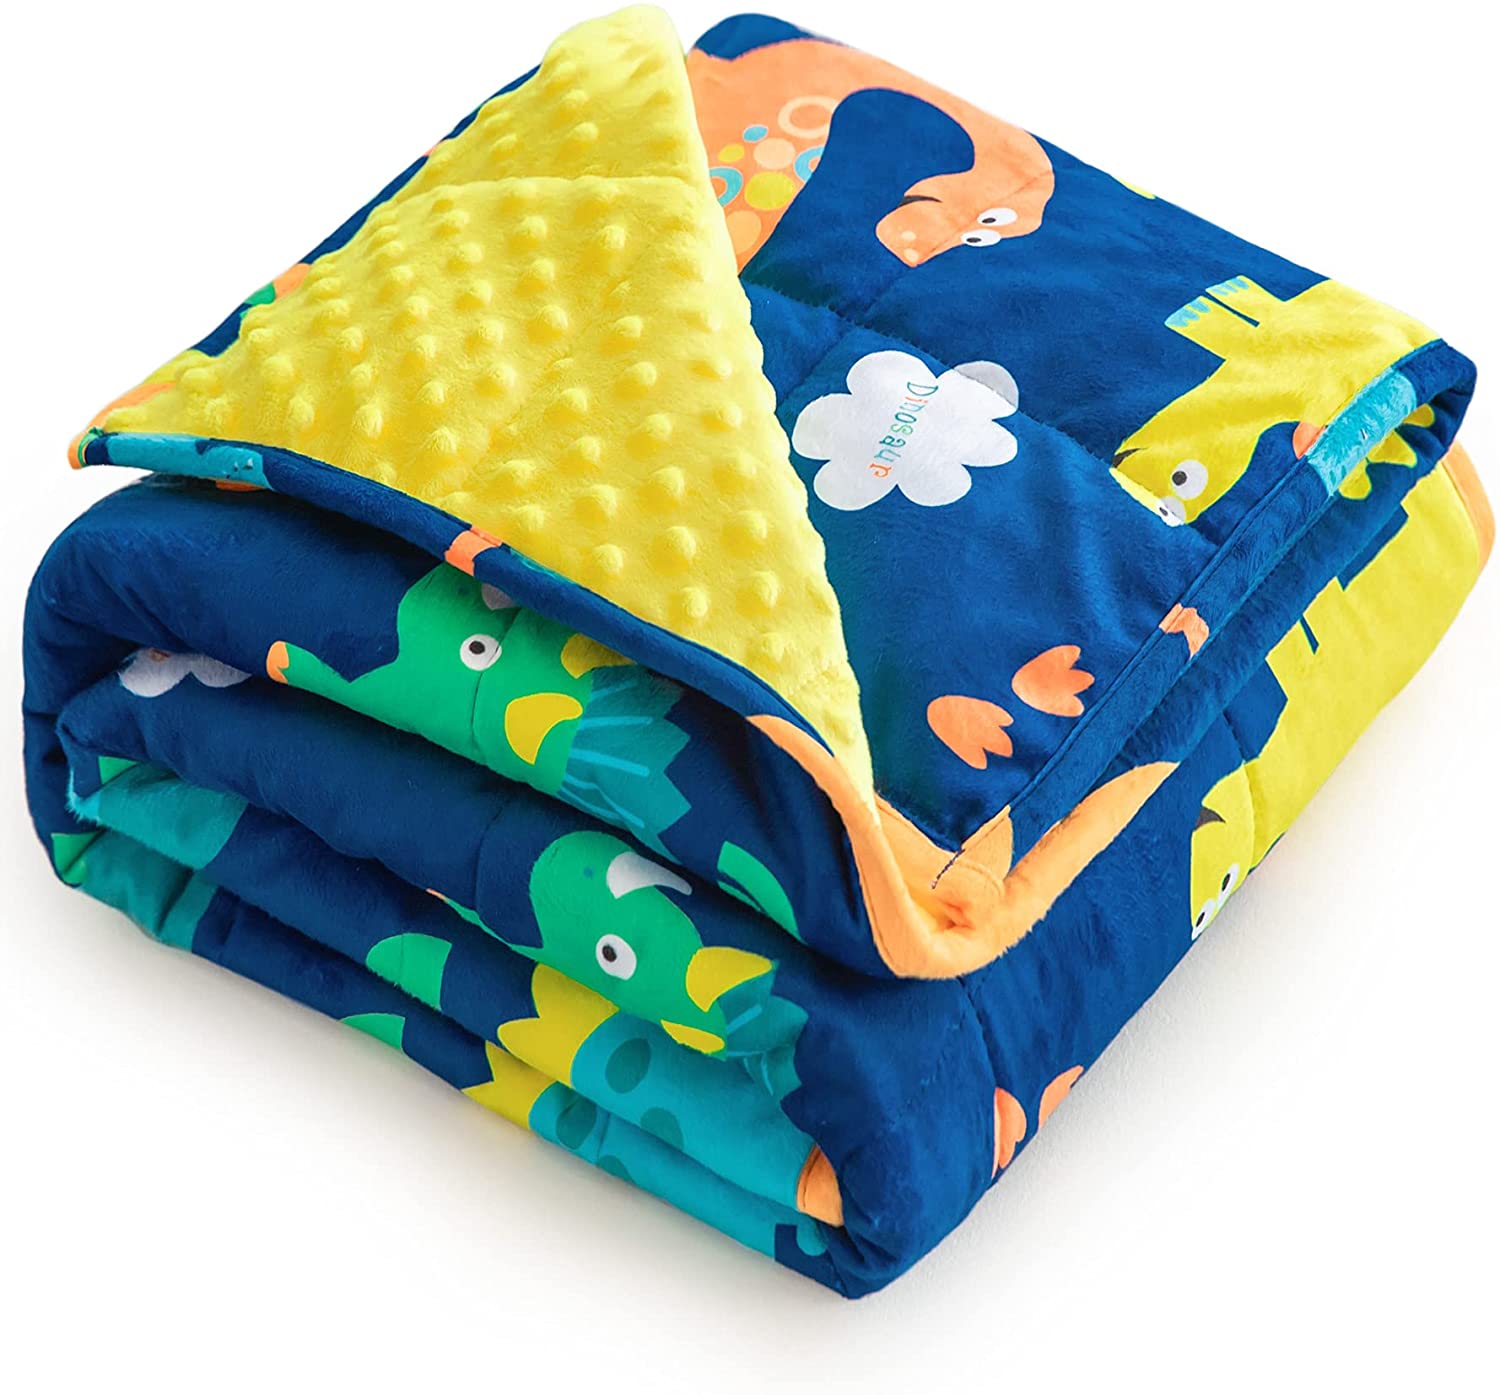 19 x 21 Inch Blue Dinosaur Sivio Weighted Lap Pad for Kid 2lbs 100% Cotton Weighted Blanket for Children Sensory Weighted Lap Blanket for Kids Indoor Outdoor